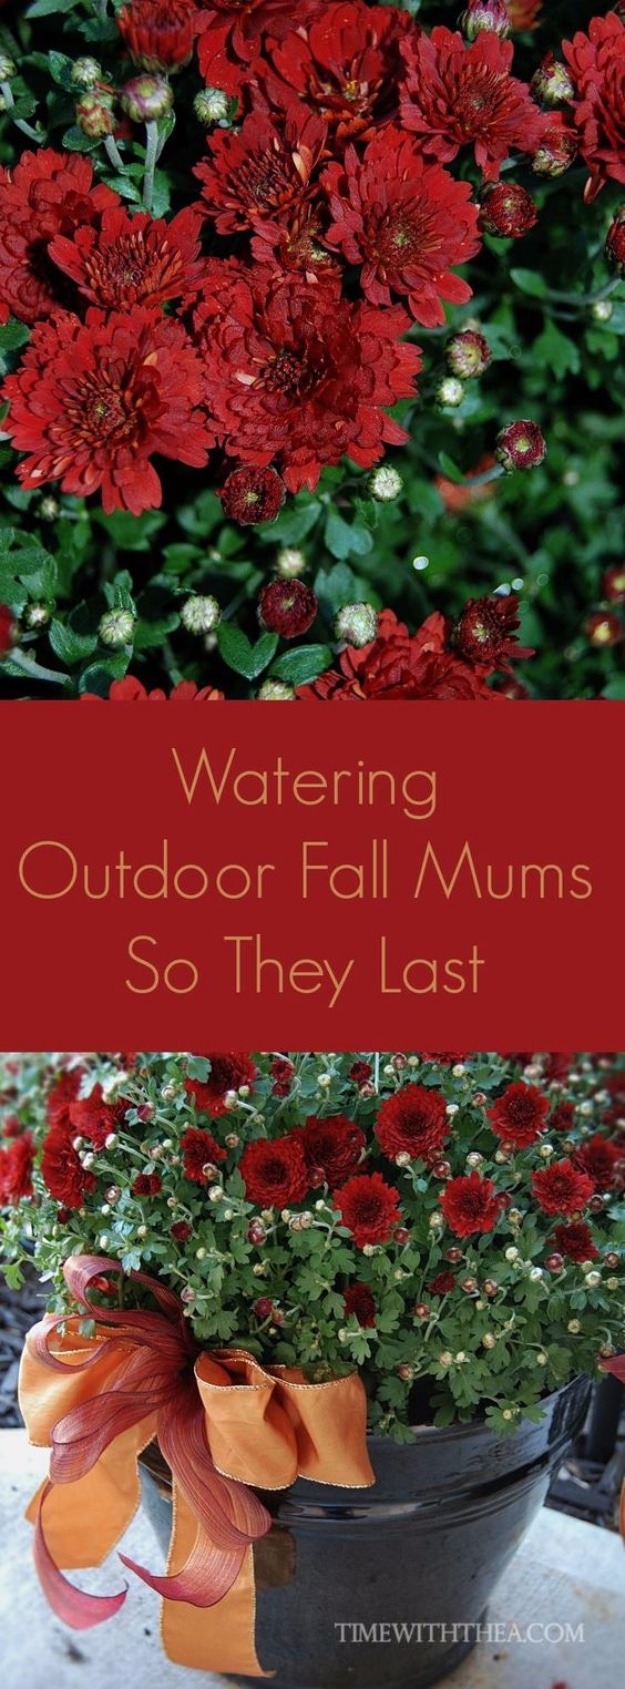 Best Gardening Ideas for Fall - Watering Outdoor Fall Mums So They Last - Cool DIY Garden Ideas for Planting Autumn Varieties of Flowers and Vegetables - Pumpkins, Container Gardens, Planting Tips, Herbs and Easy Ideas for Beginners 